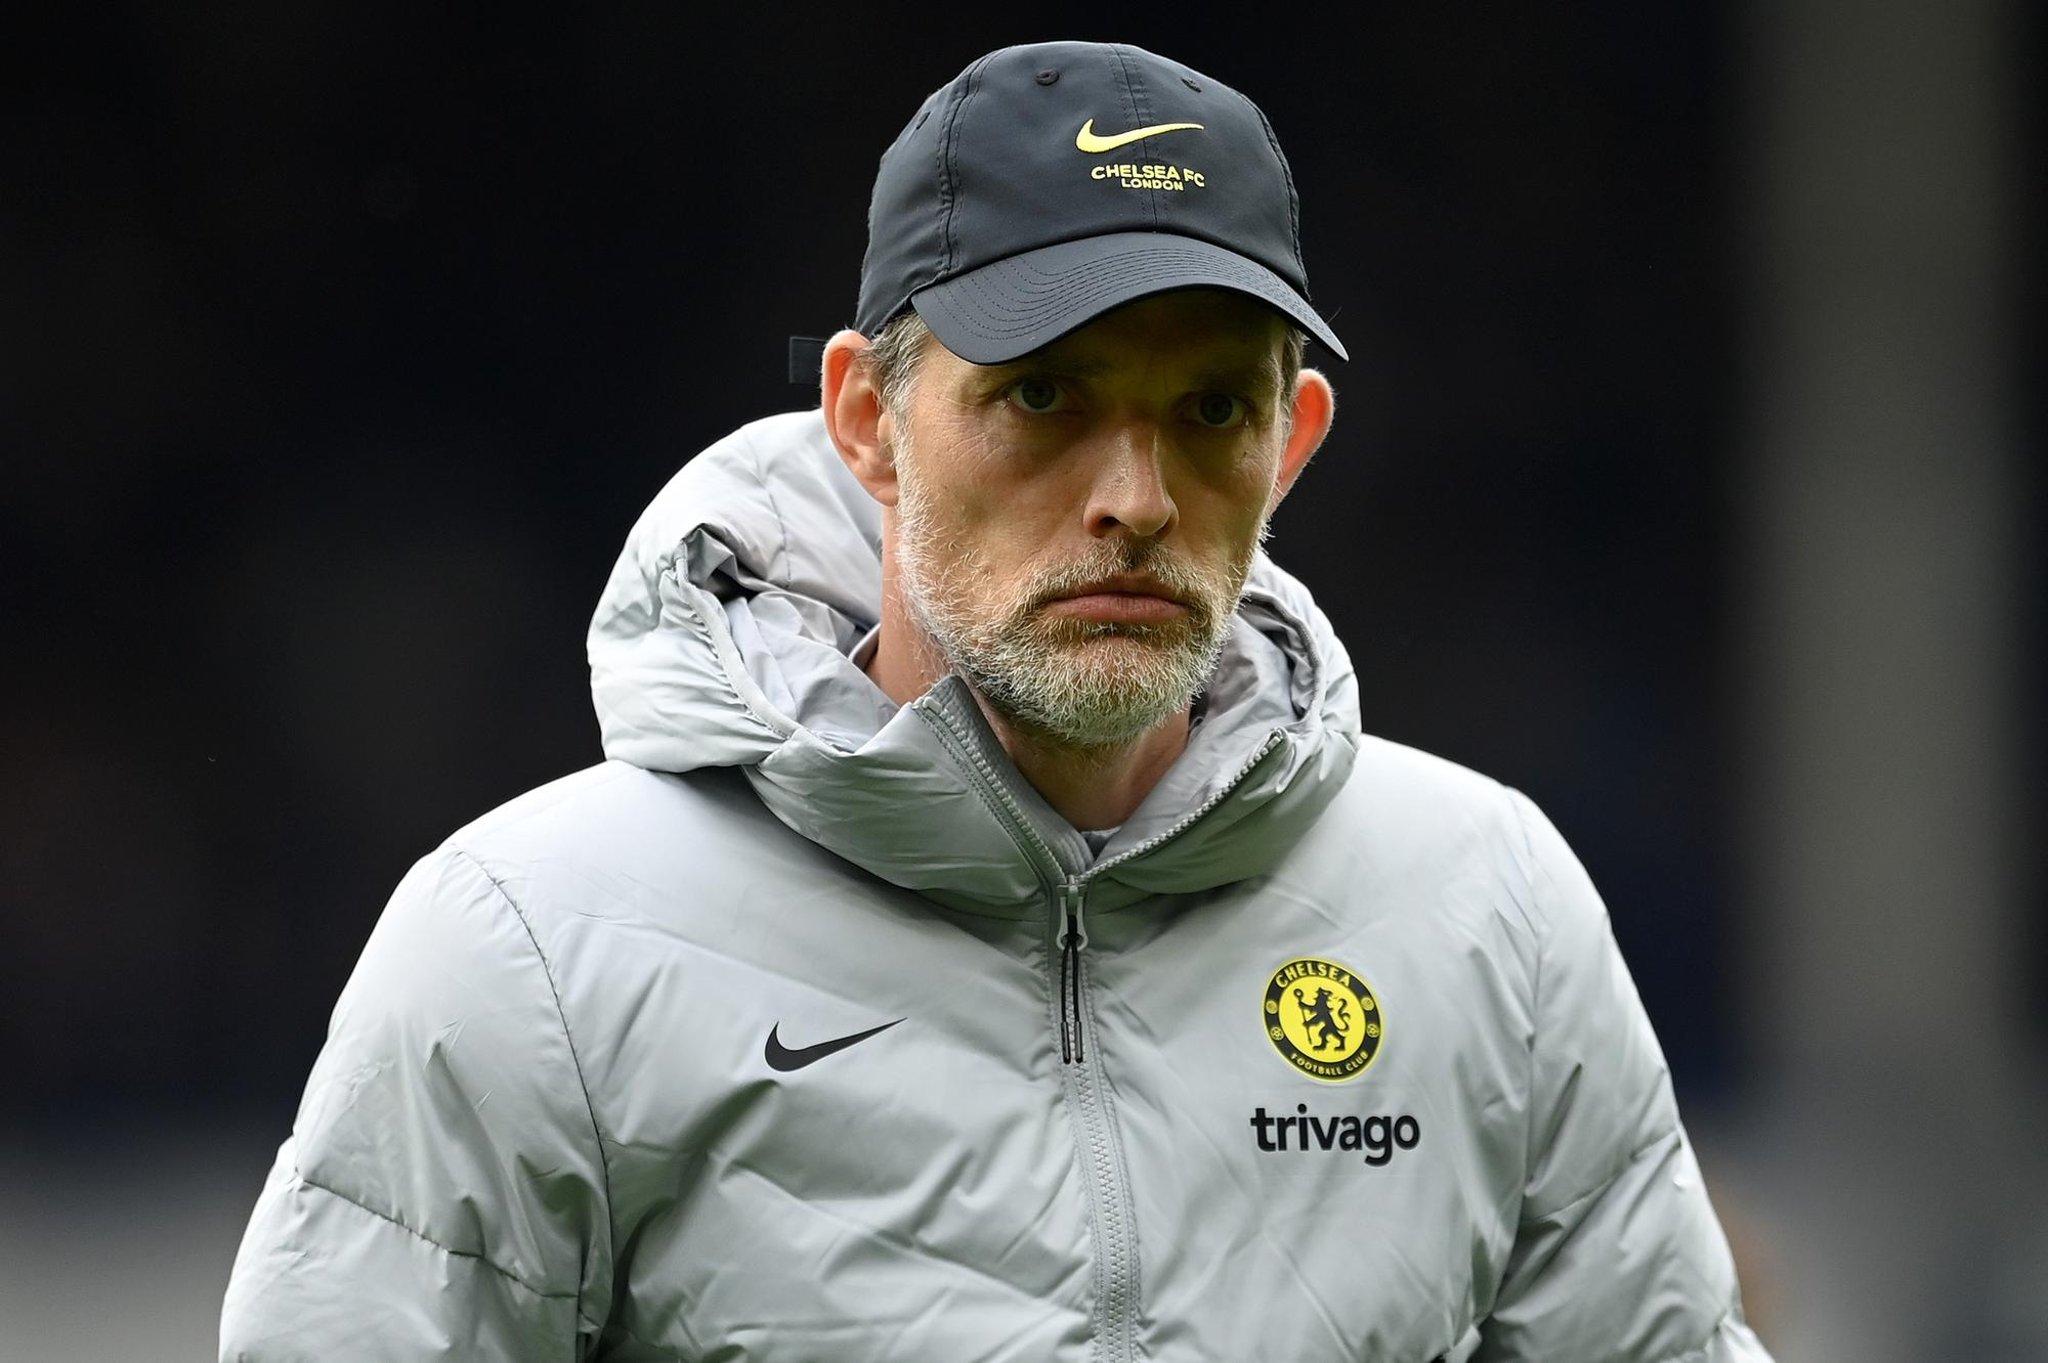 'Get a grip' - Chelsea boss Thomas Tuchel comes under fire from Pompey fans for recent sanctions comments - Portsmouth News